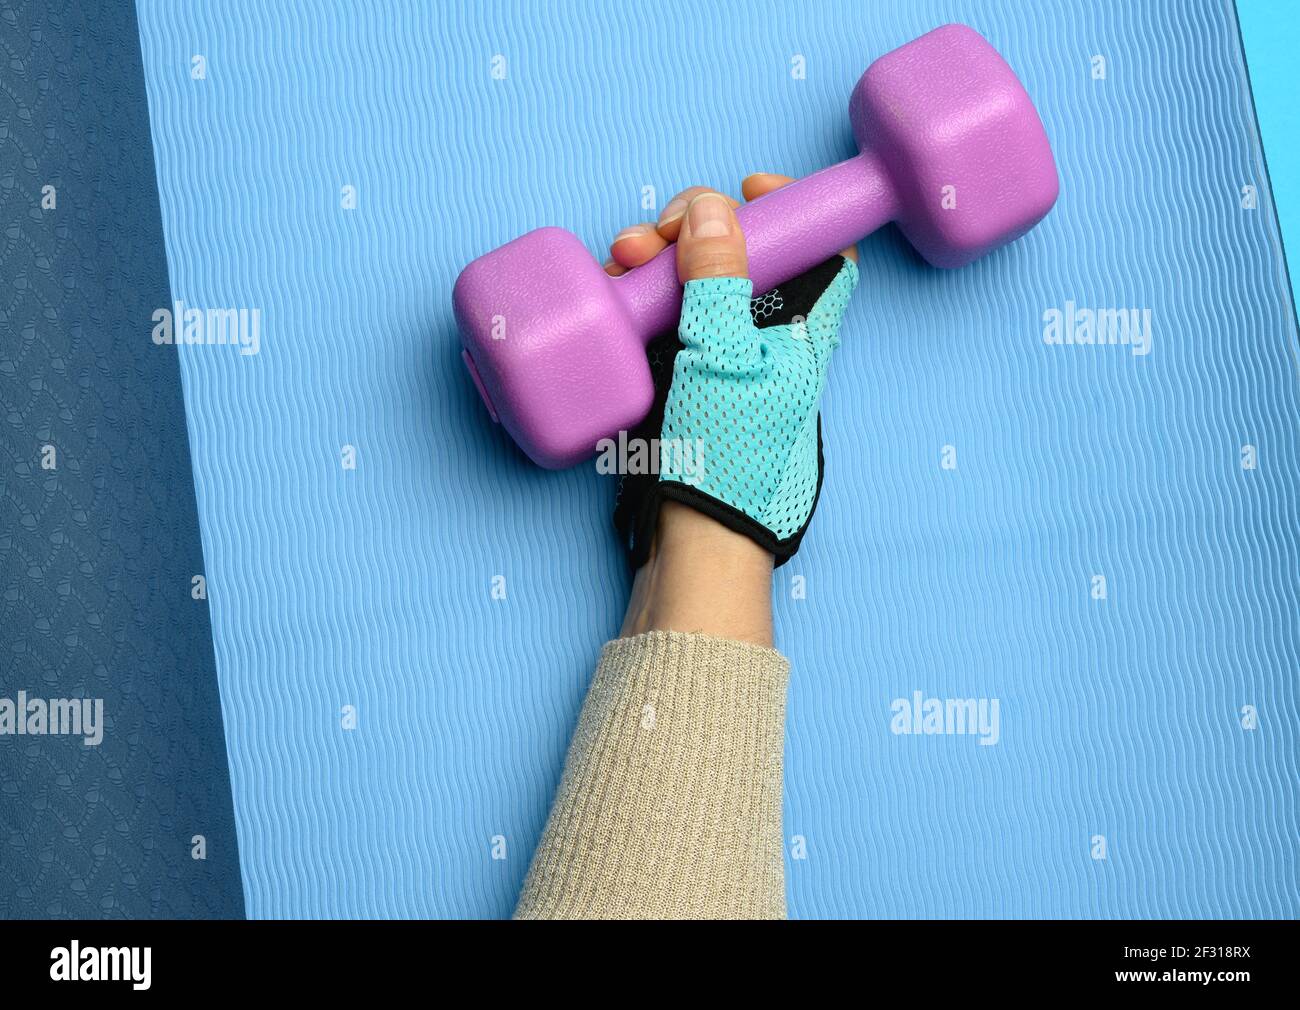 Female hand in a blue sports glove holds a purple one kilogram dumbbell on a blue background, Stock Photo